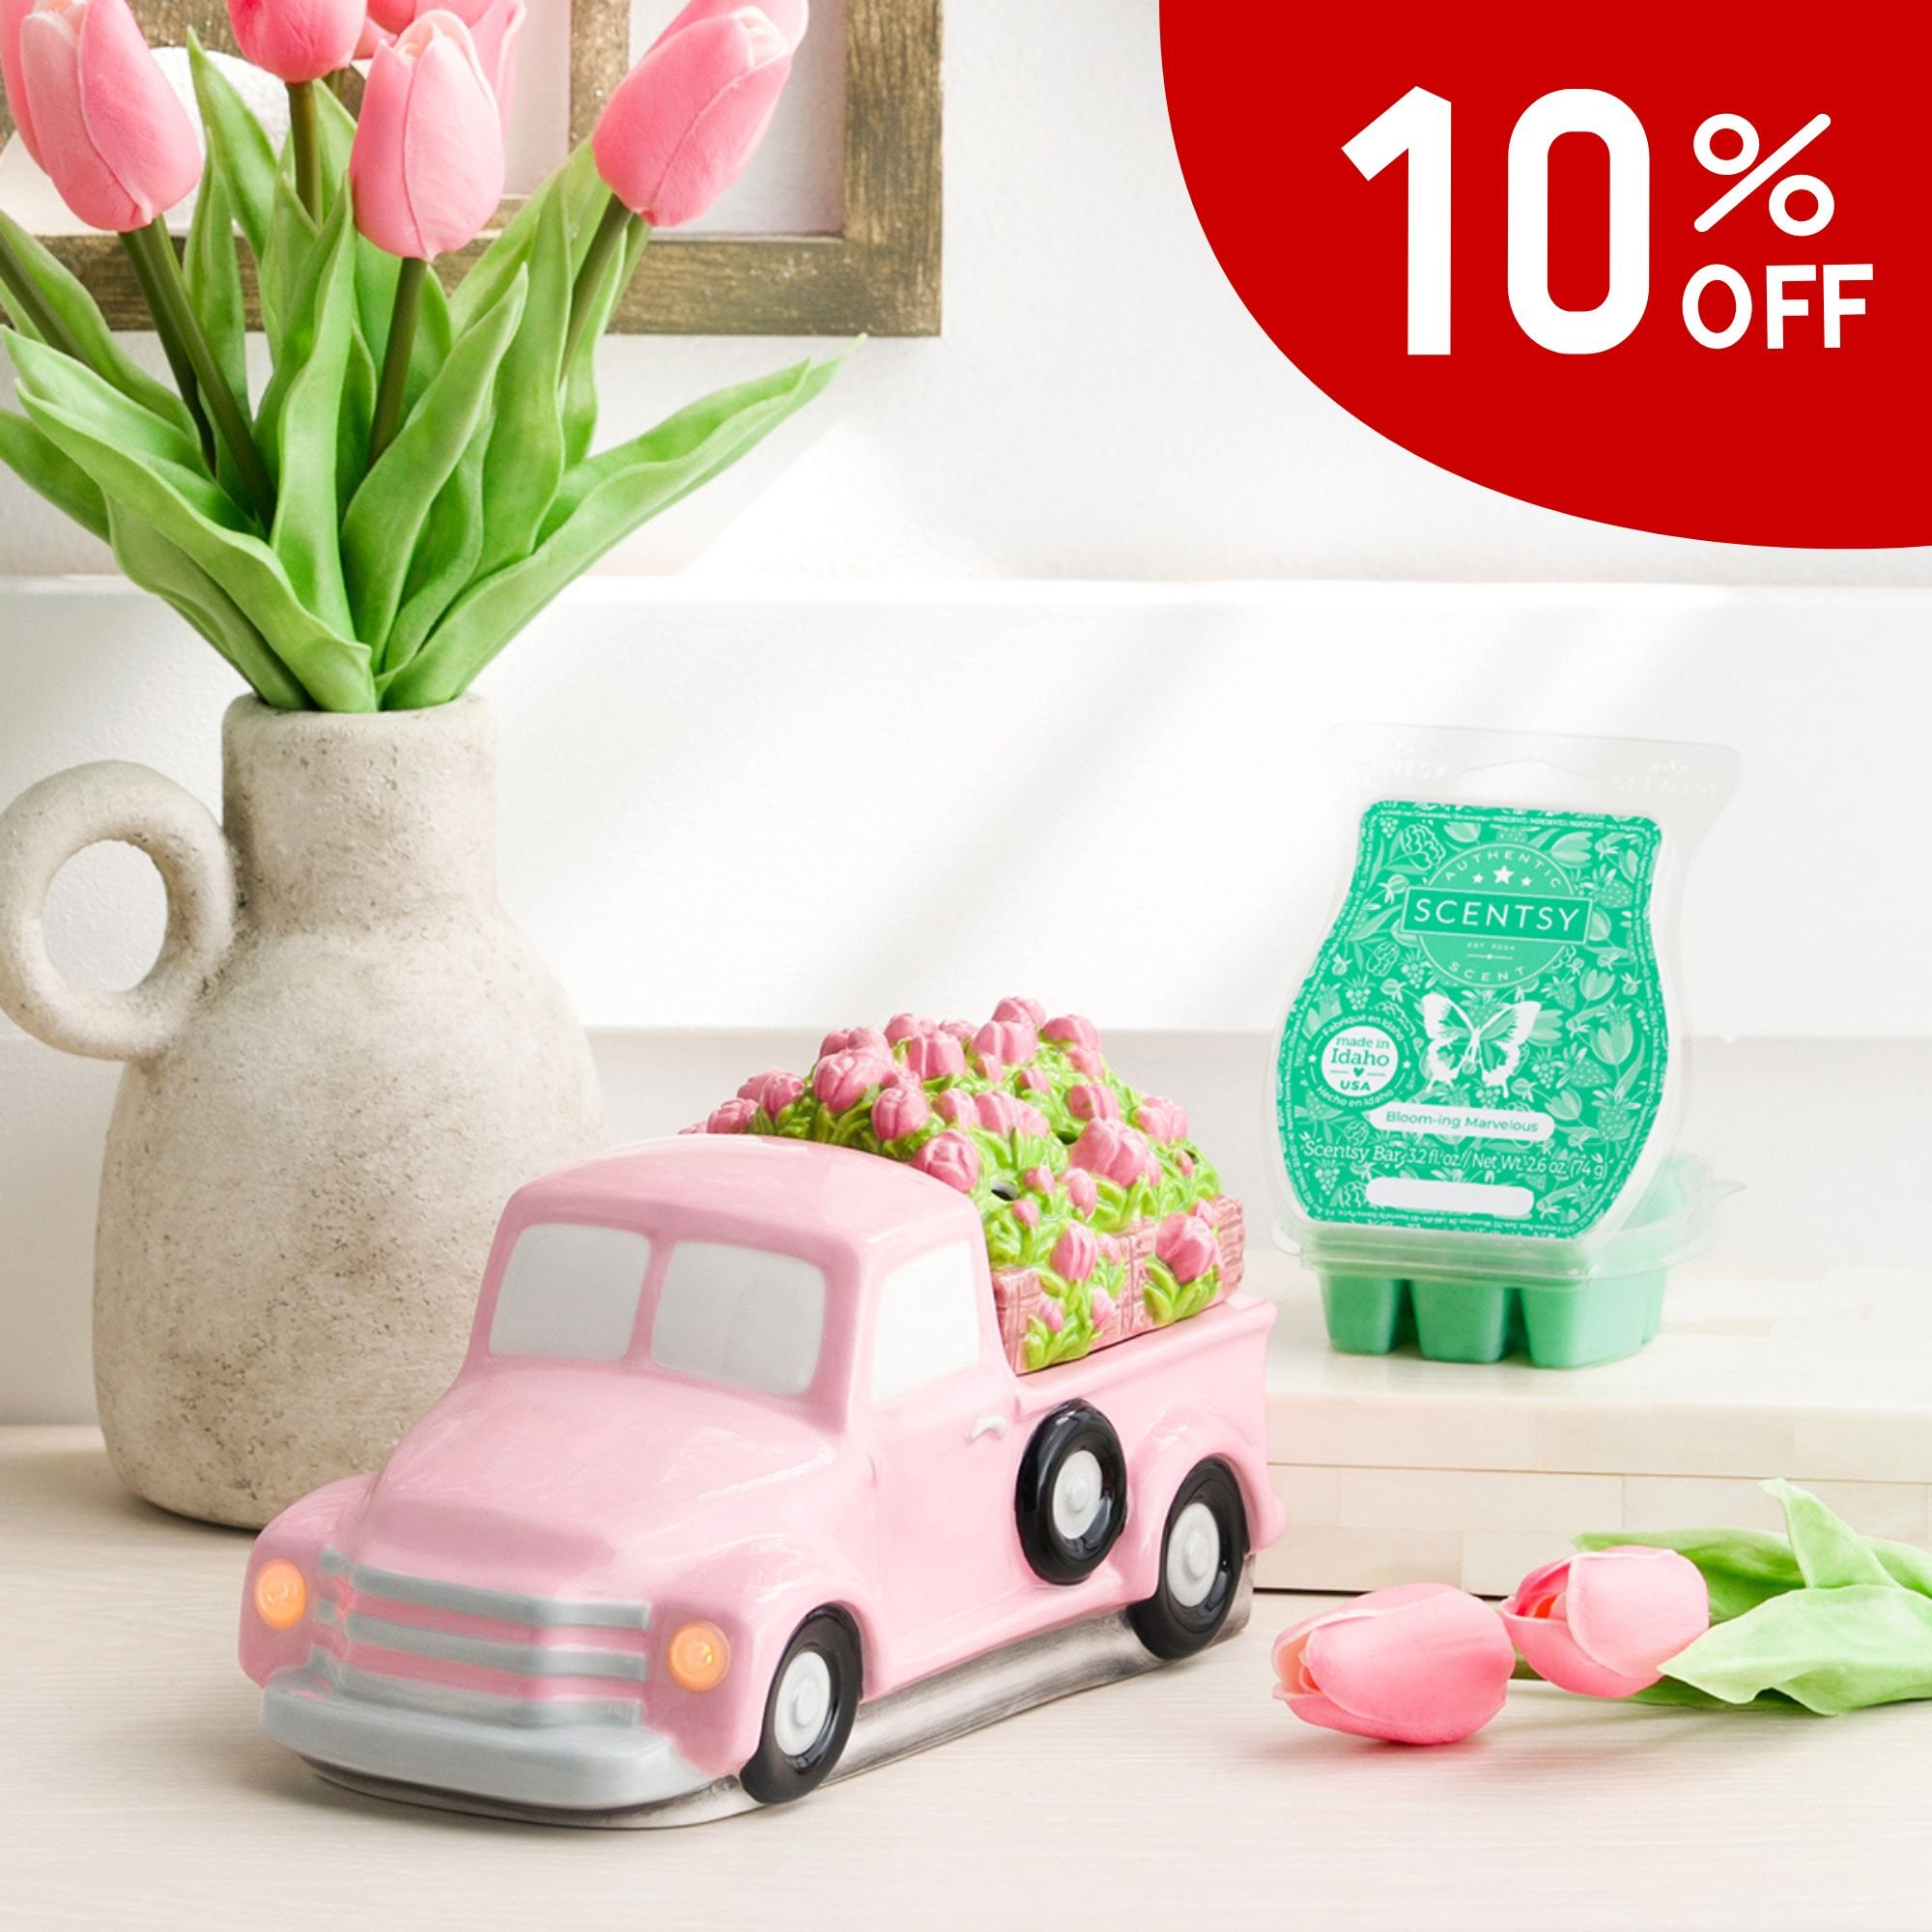 10% off May Scentsy warmer and scent of the month.jpg